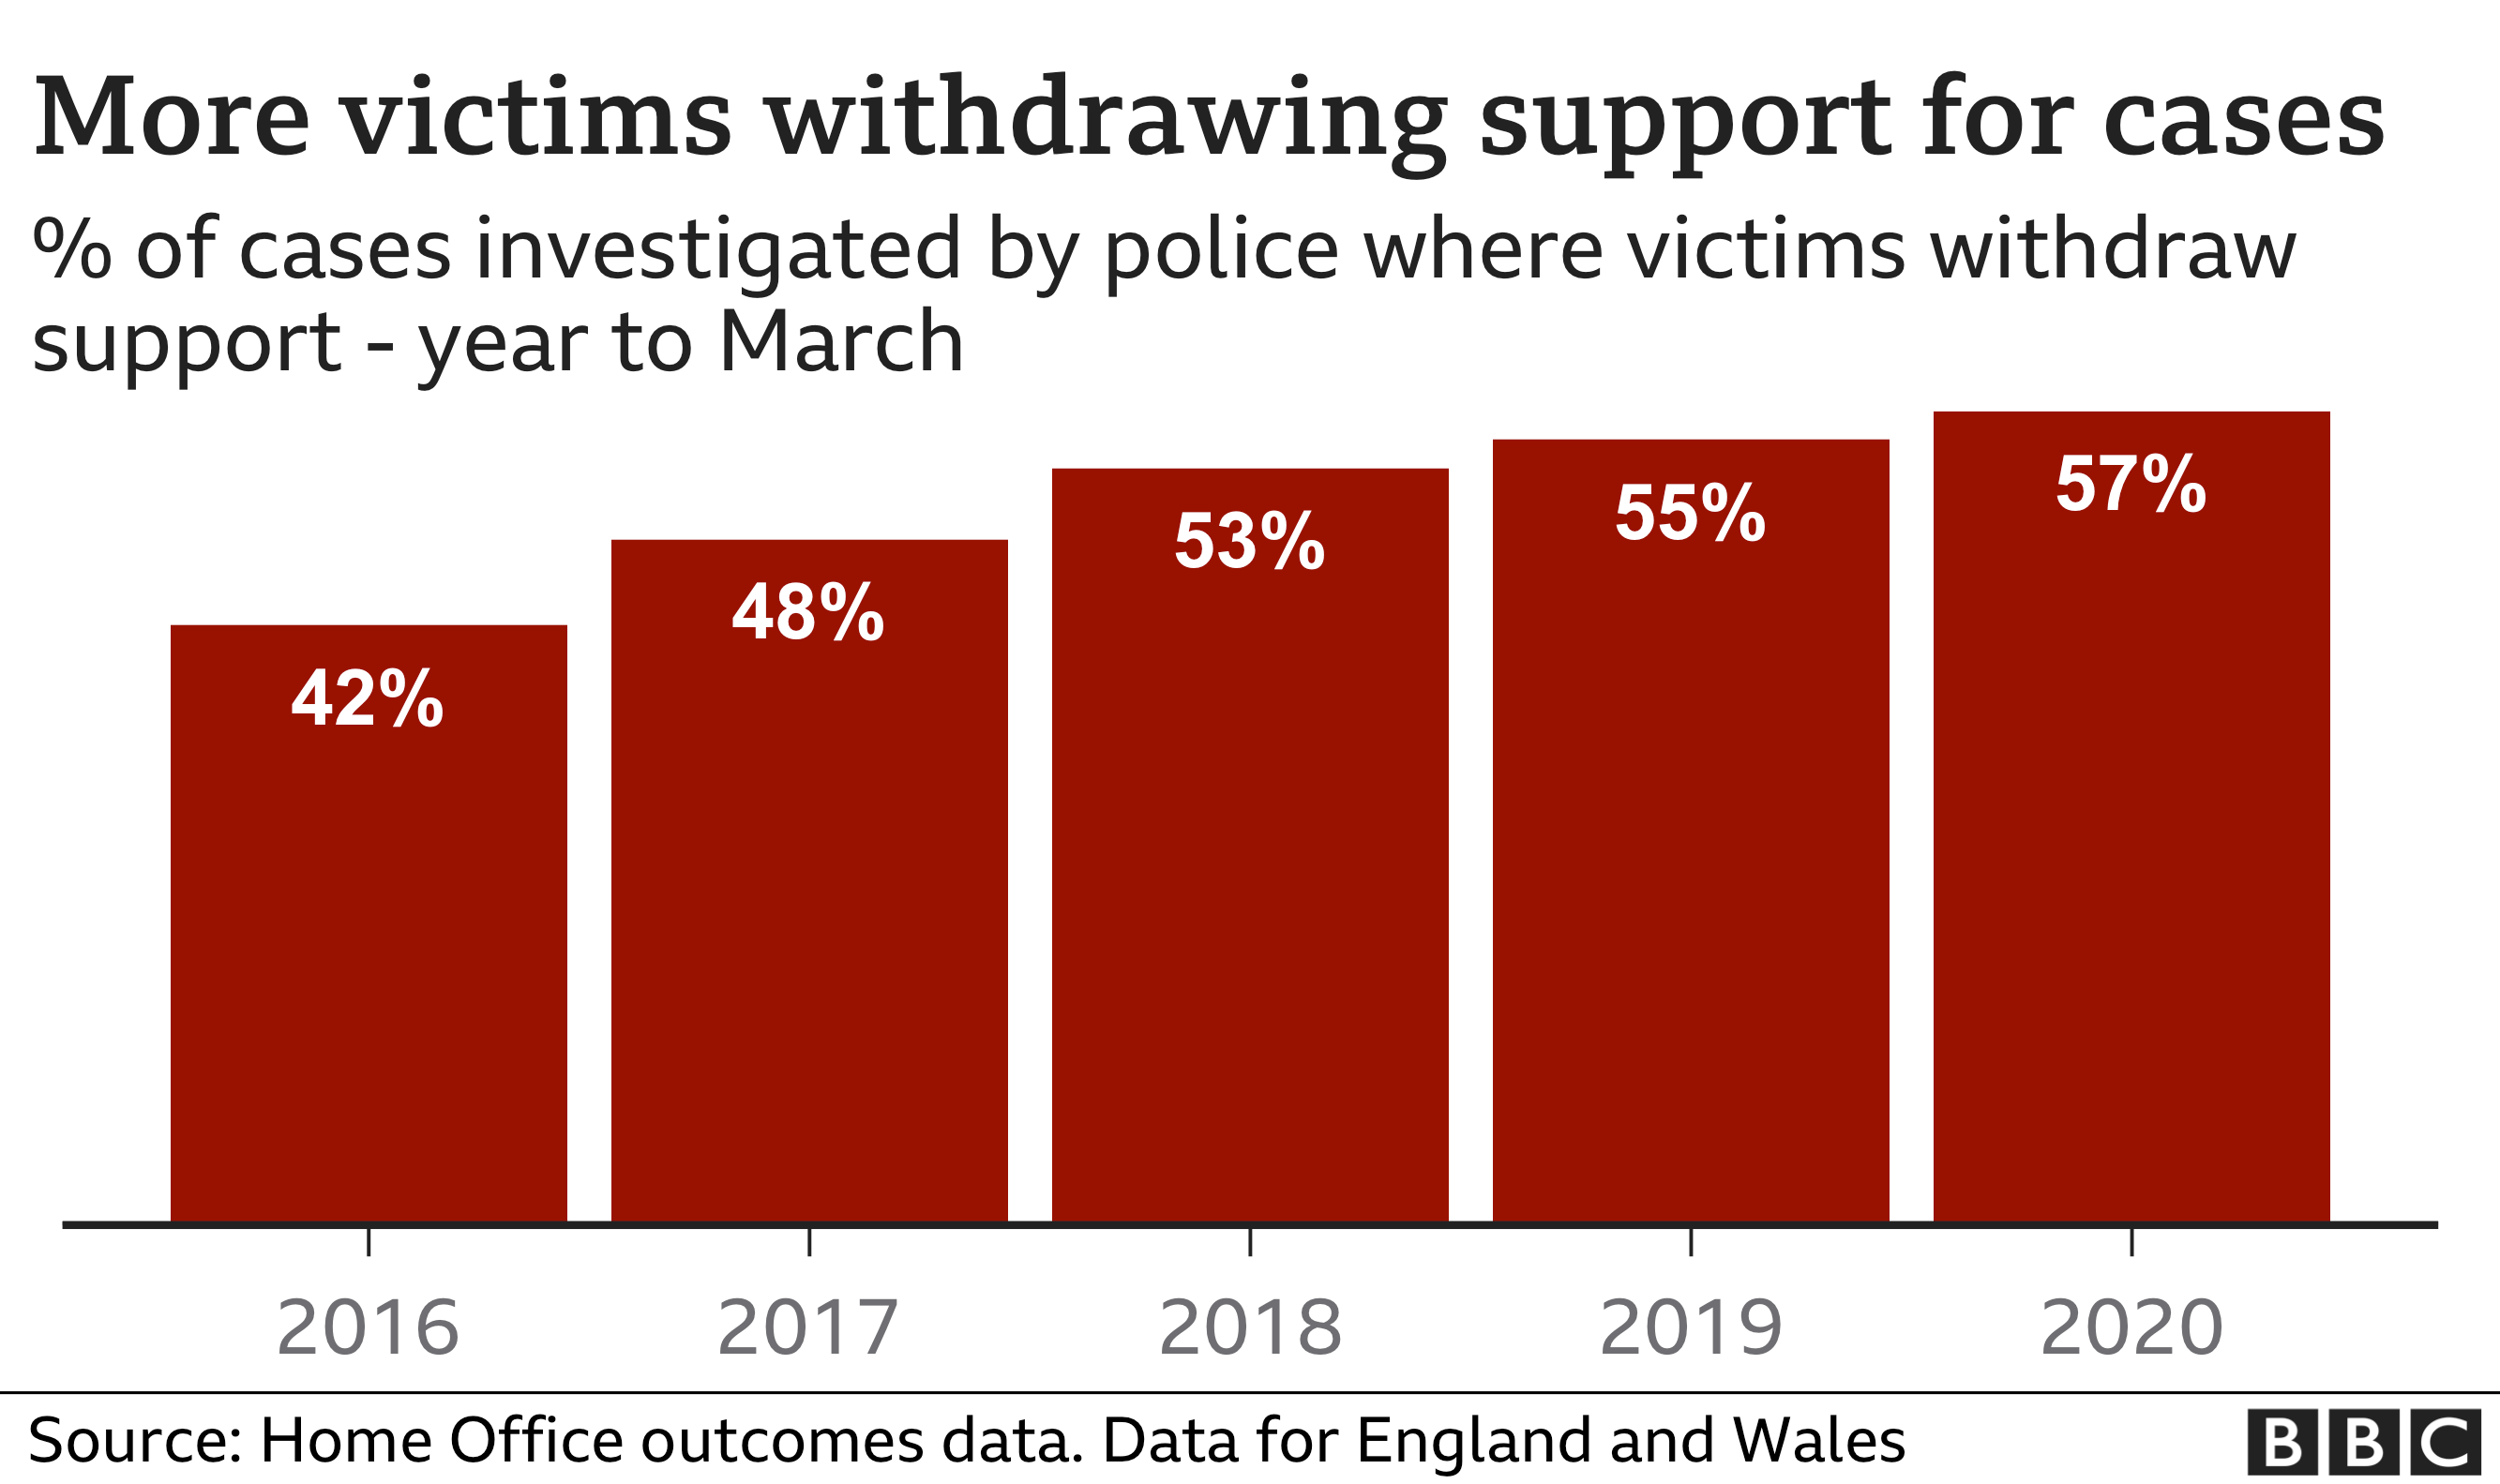 Percentage of cases where victims withdraw their support has risen from 42% in 2015-16 to 57% in 2019-20.